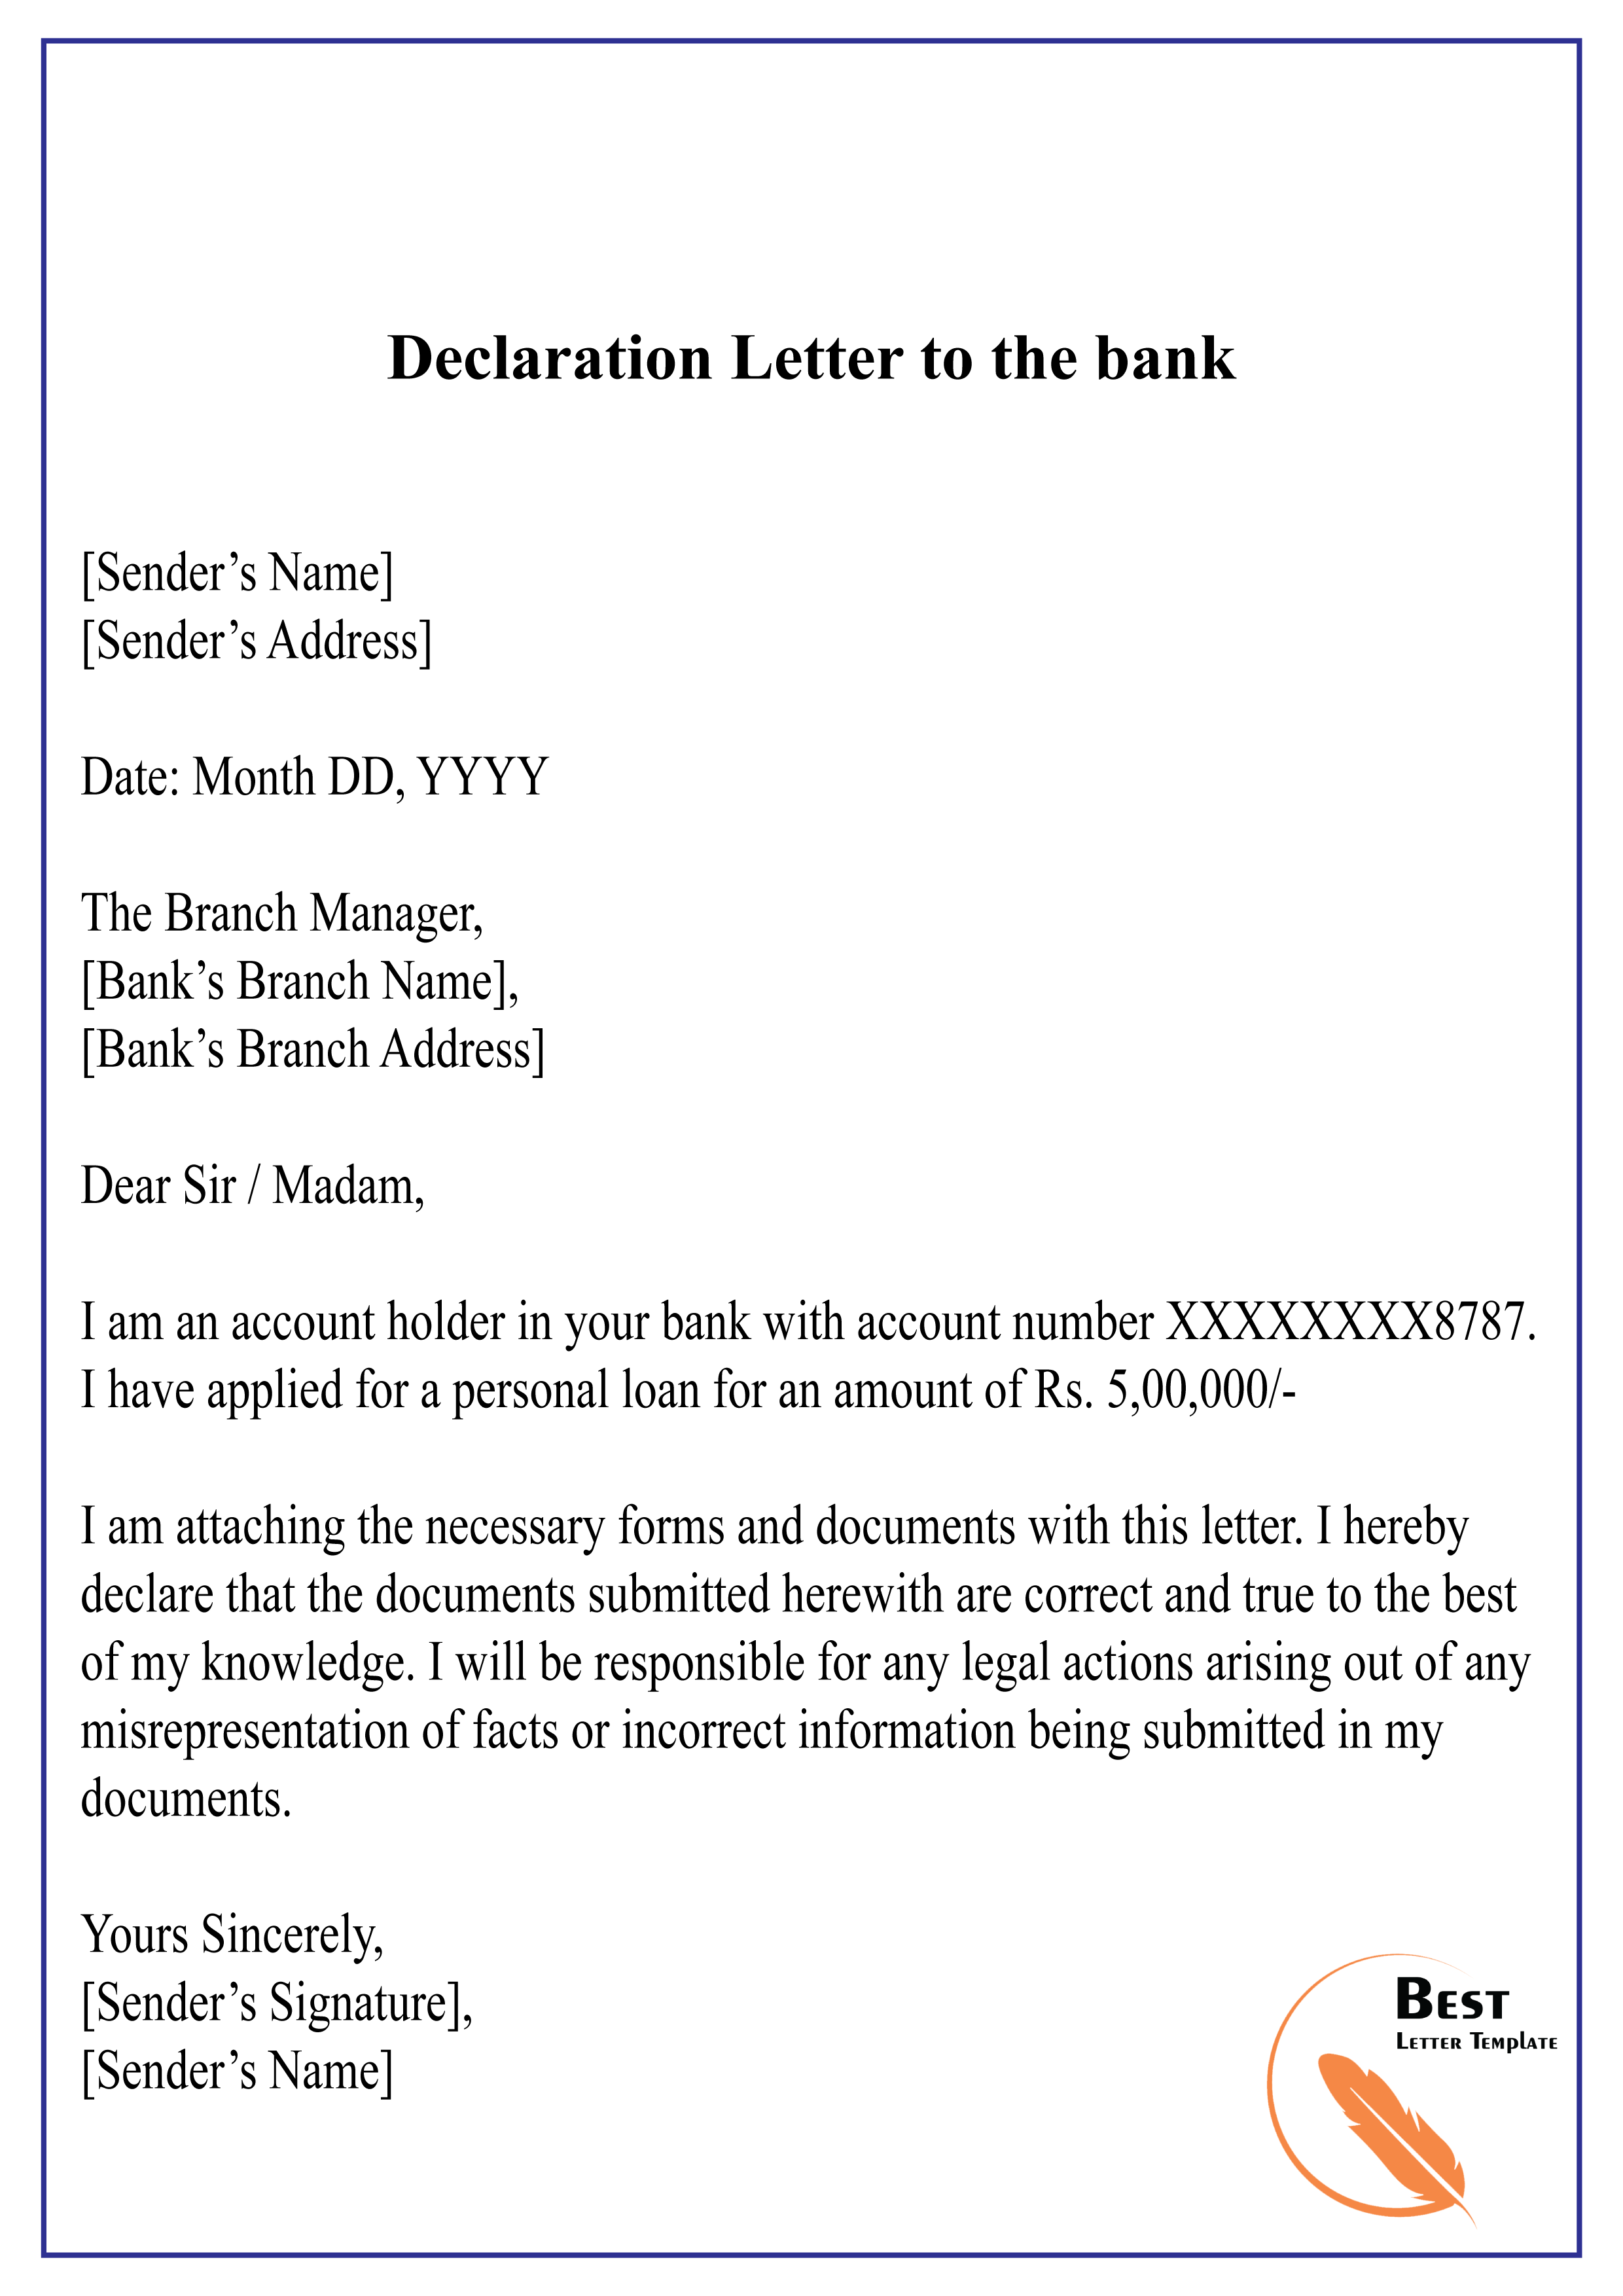 Declaration Letter to the bank-01 - Best Letter Template